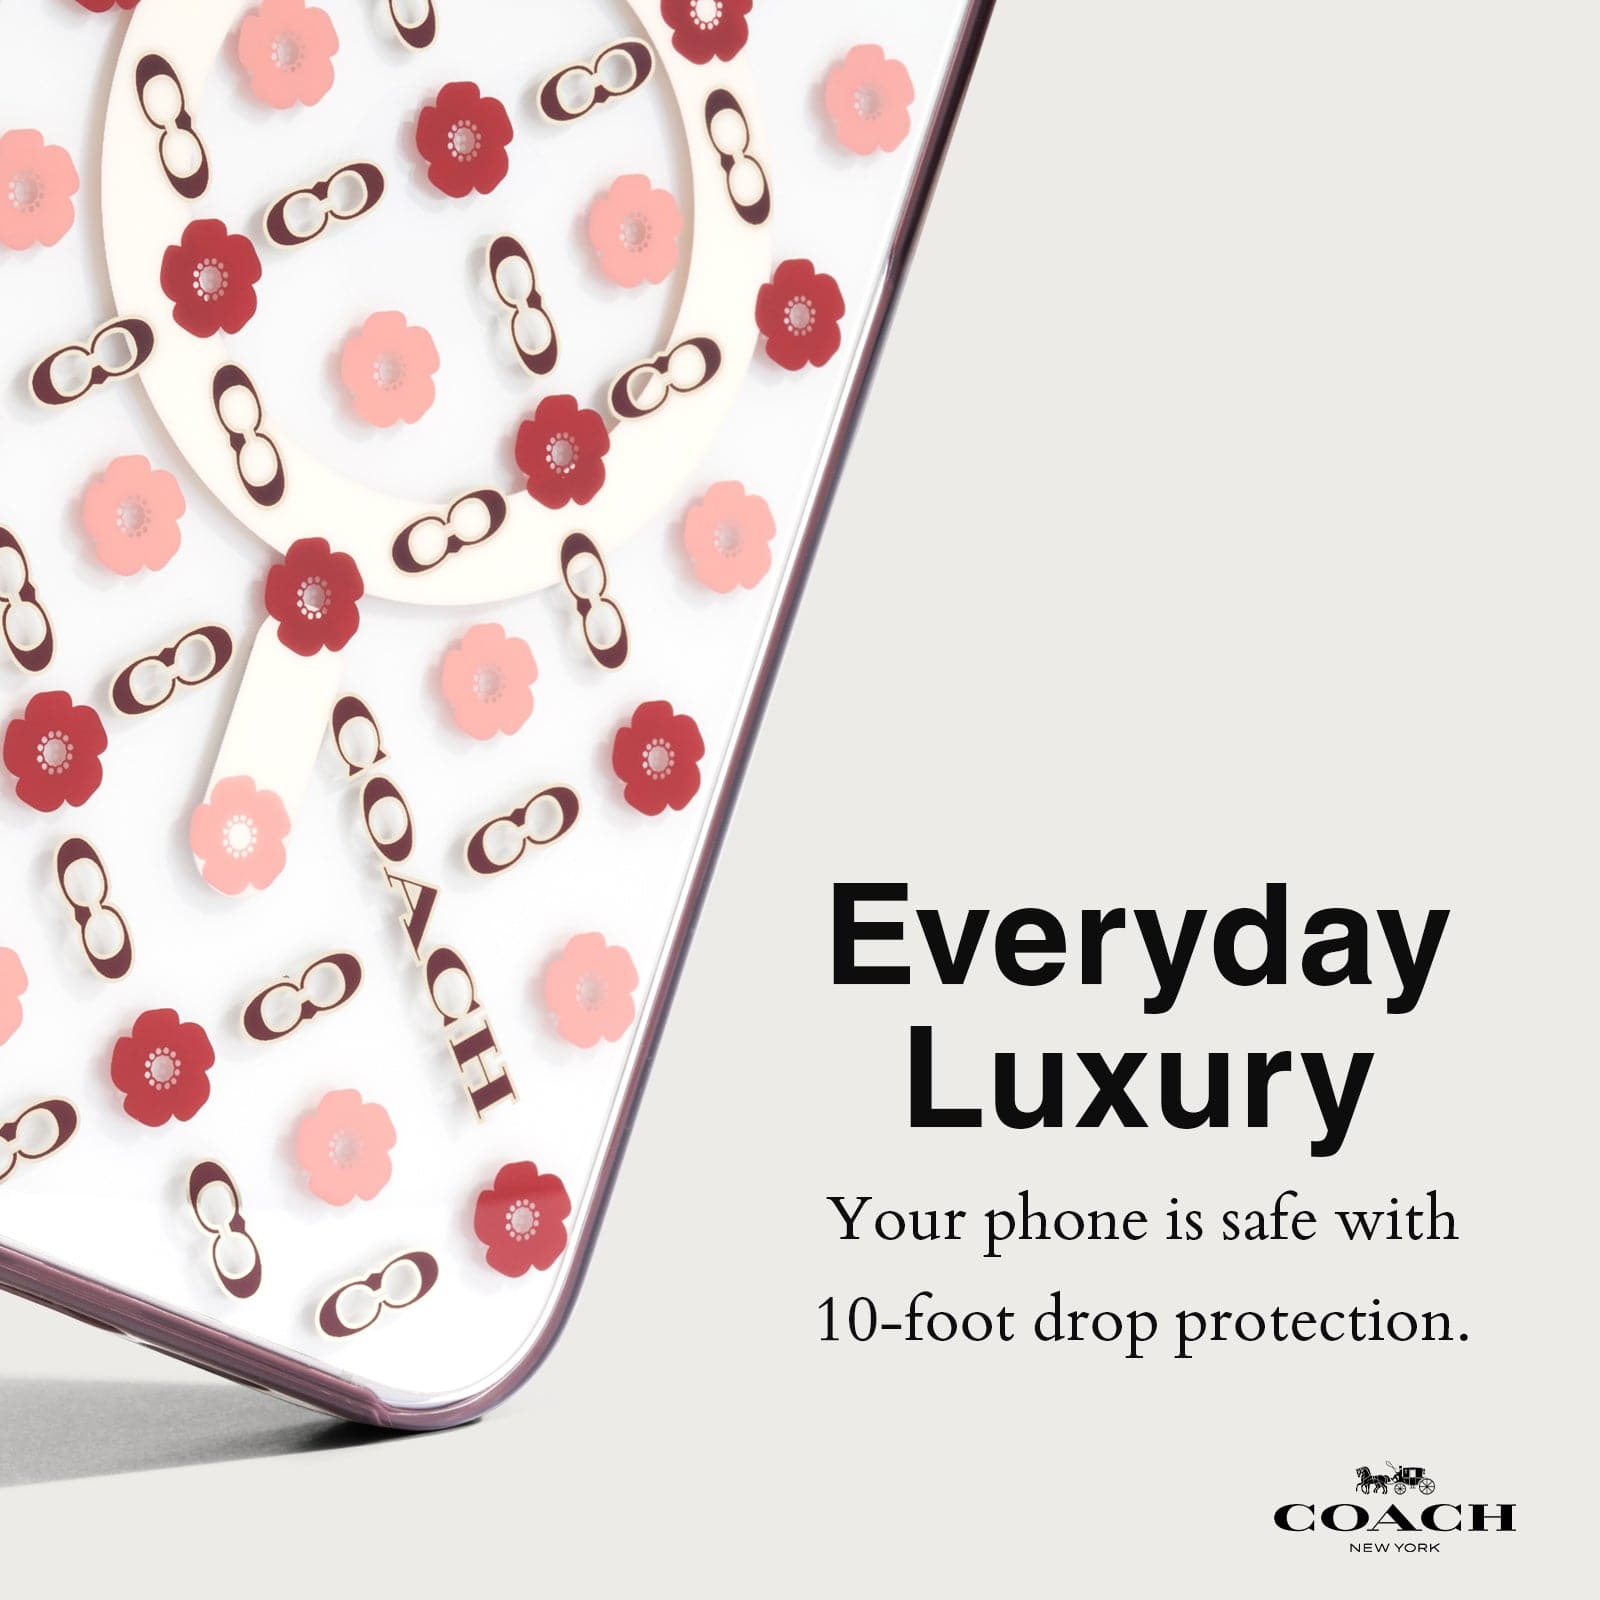 EVERYDAY LUXURY. YOUR PHONE IS SAFE WOTH 10 FOOT DROP PROTECTION